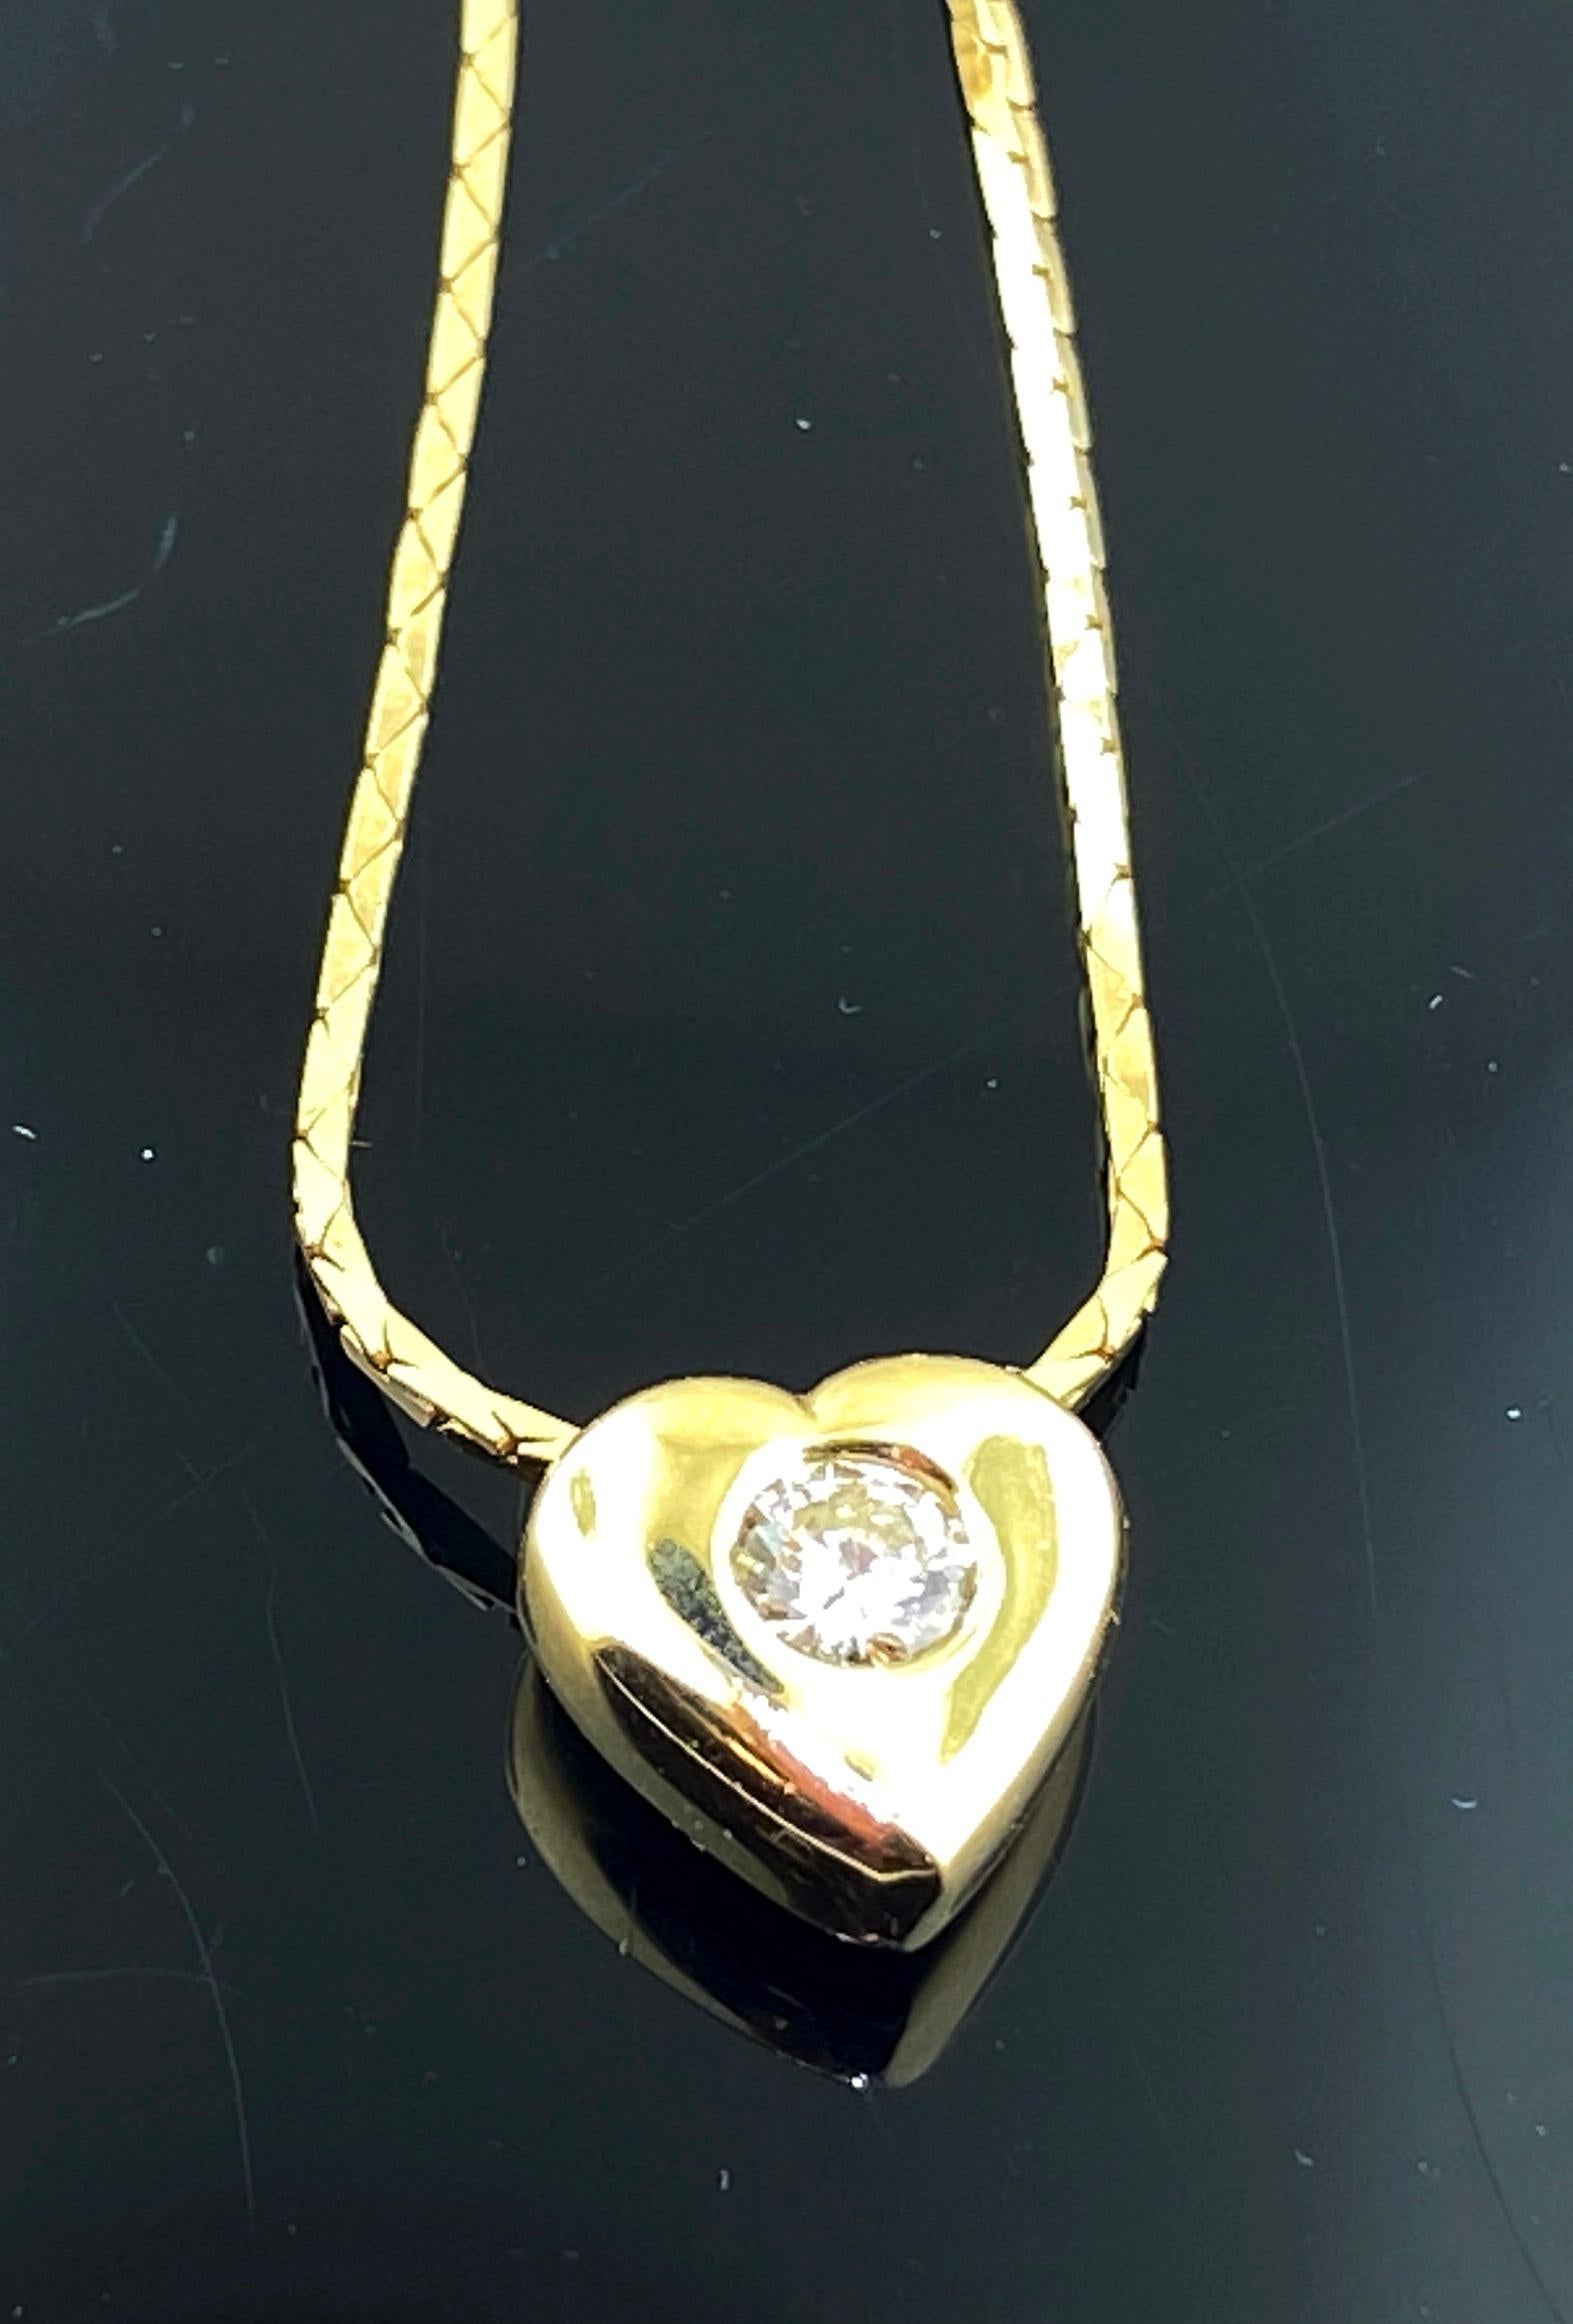 14 karat Yellow Gold Heart Pendant with an 0.33 carat Round Brilliant cut diamond on one side, Color Grade of G-H, Clarity of I-1, on the flip side is an 0.33 carat Round Brilliant Cut blue Sapphire.  The chain is also 14 karat yellow gold and is